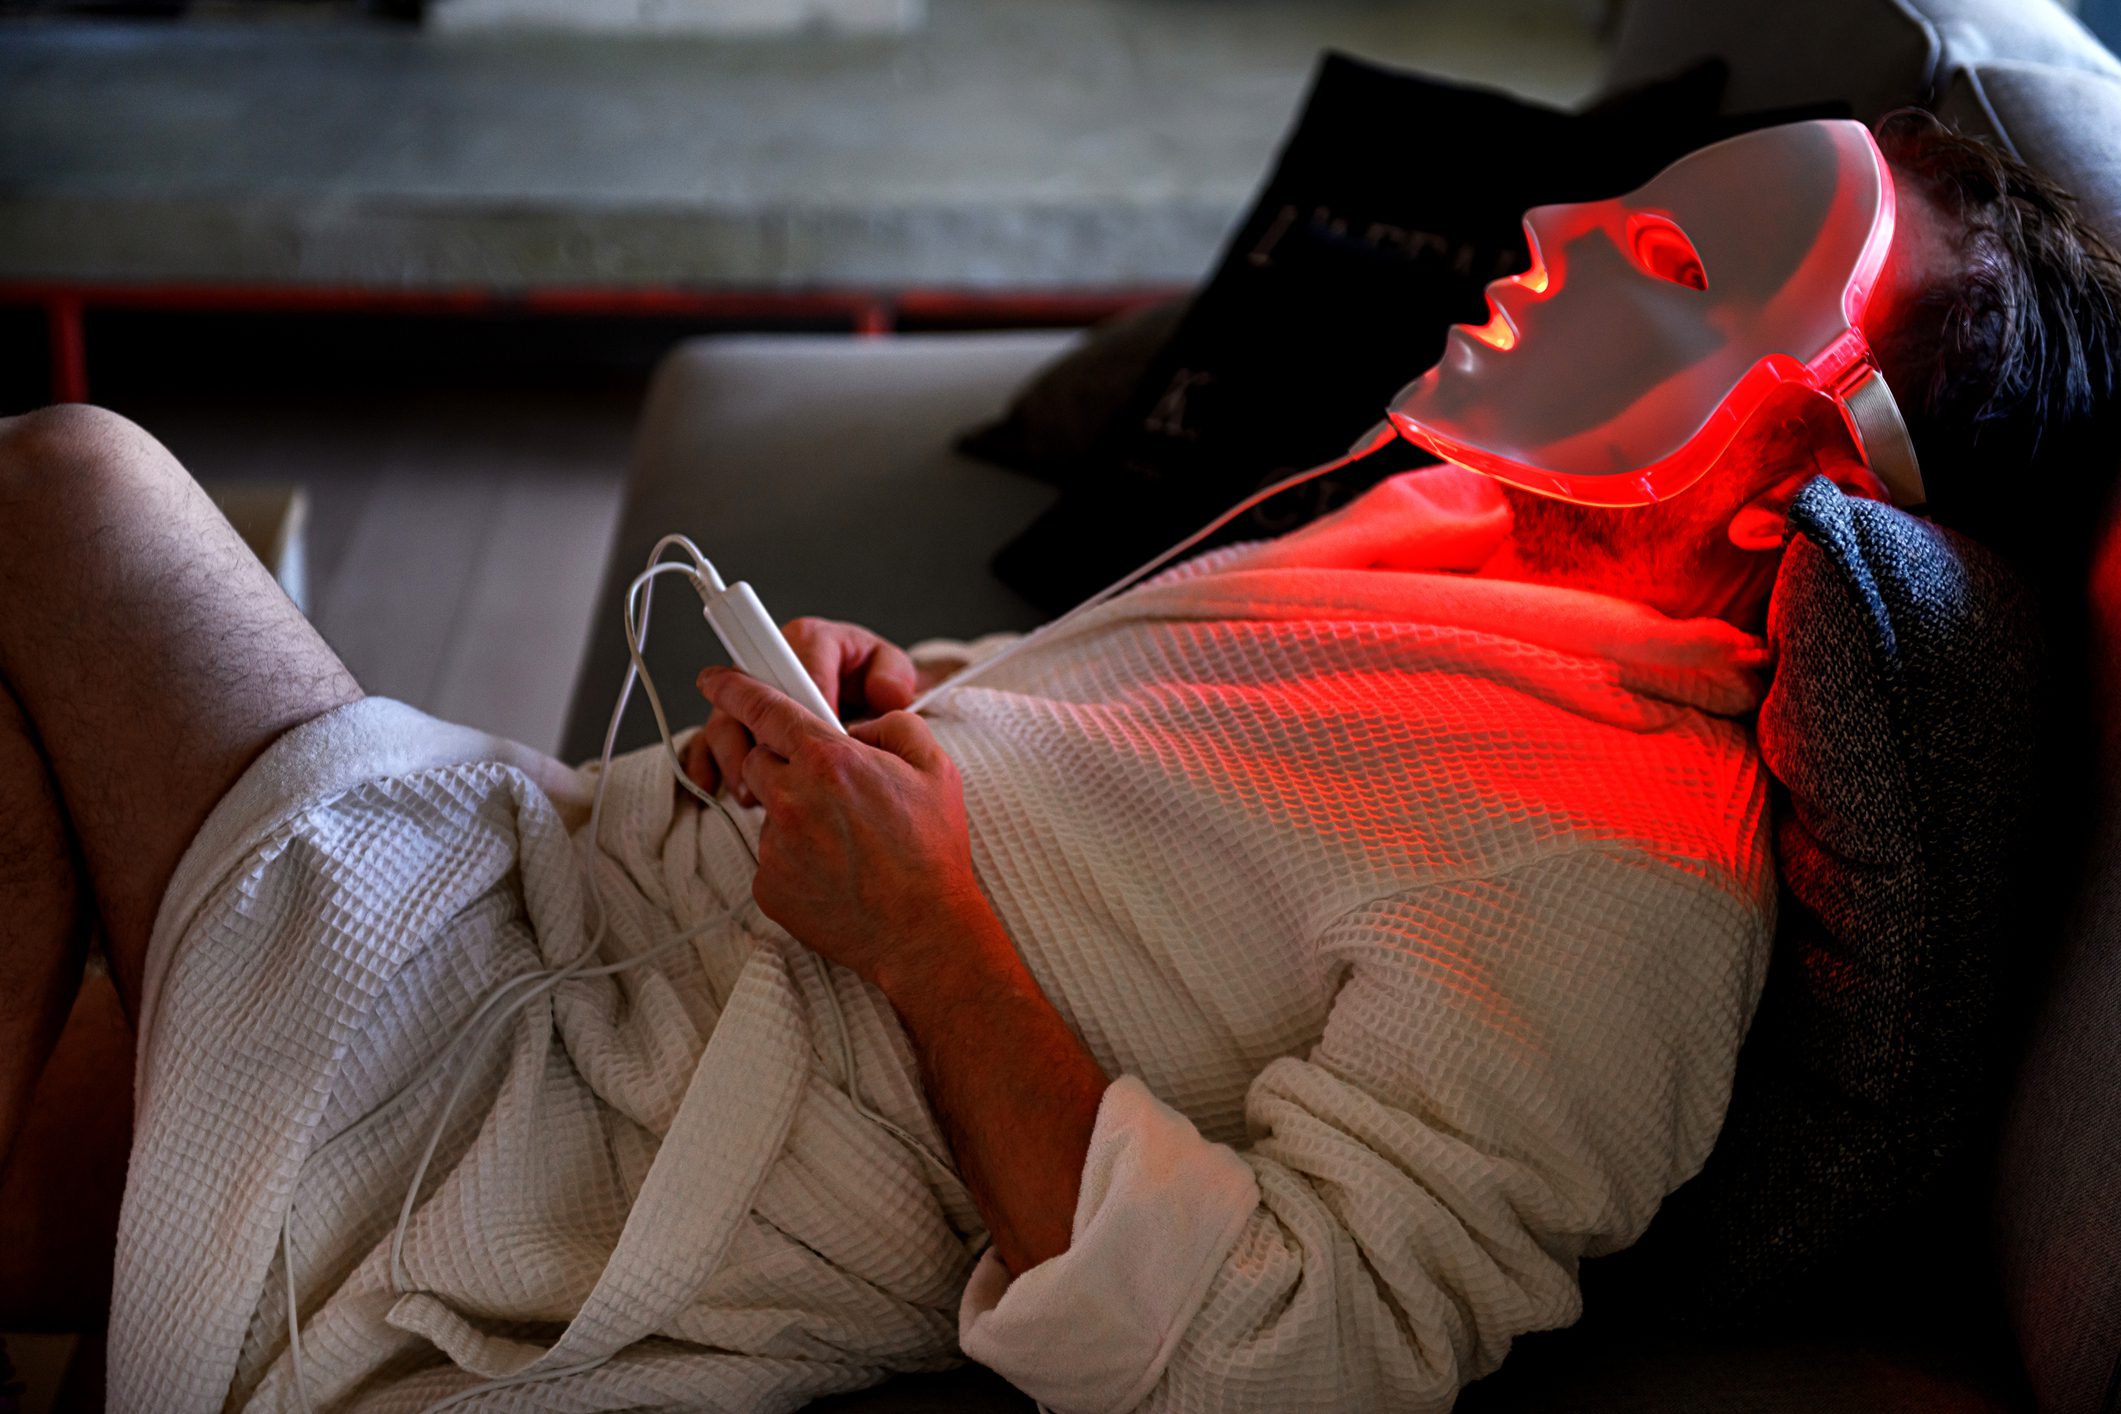 Mature man, during quarantine, trying a light therapy mask at night, Quebec, Canada